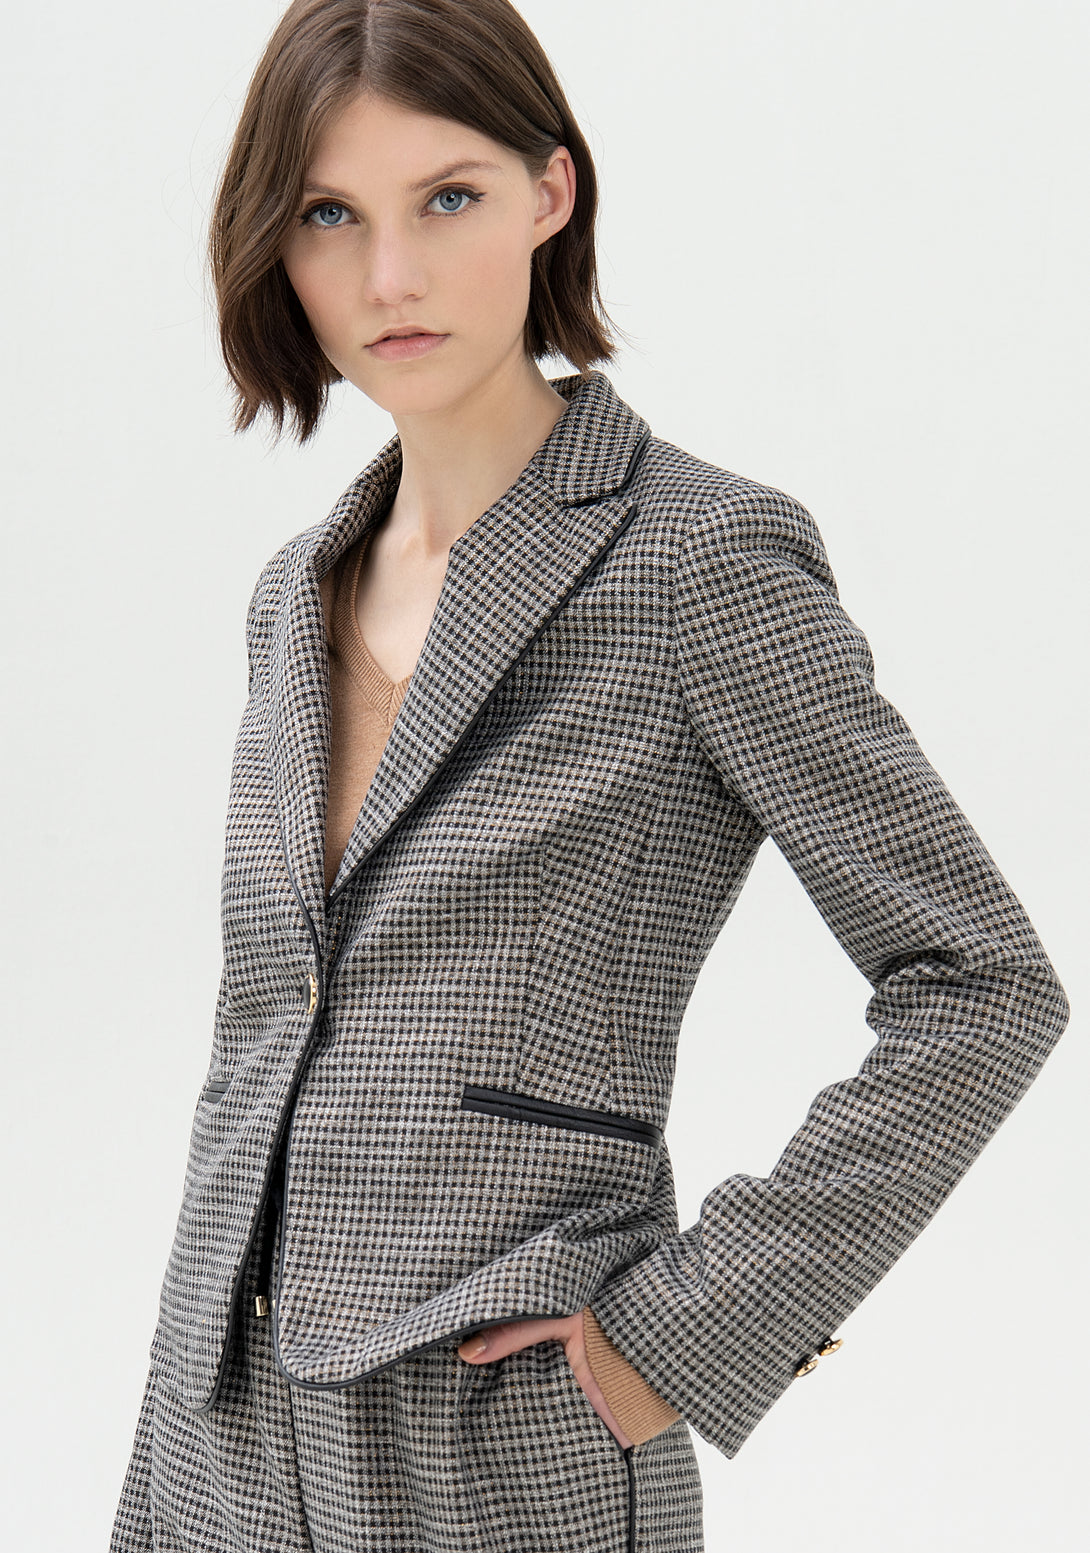 Blazer regular fit single breasted made in tweed with lurex